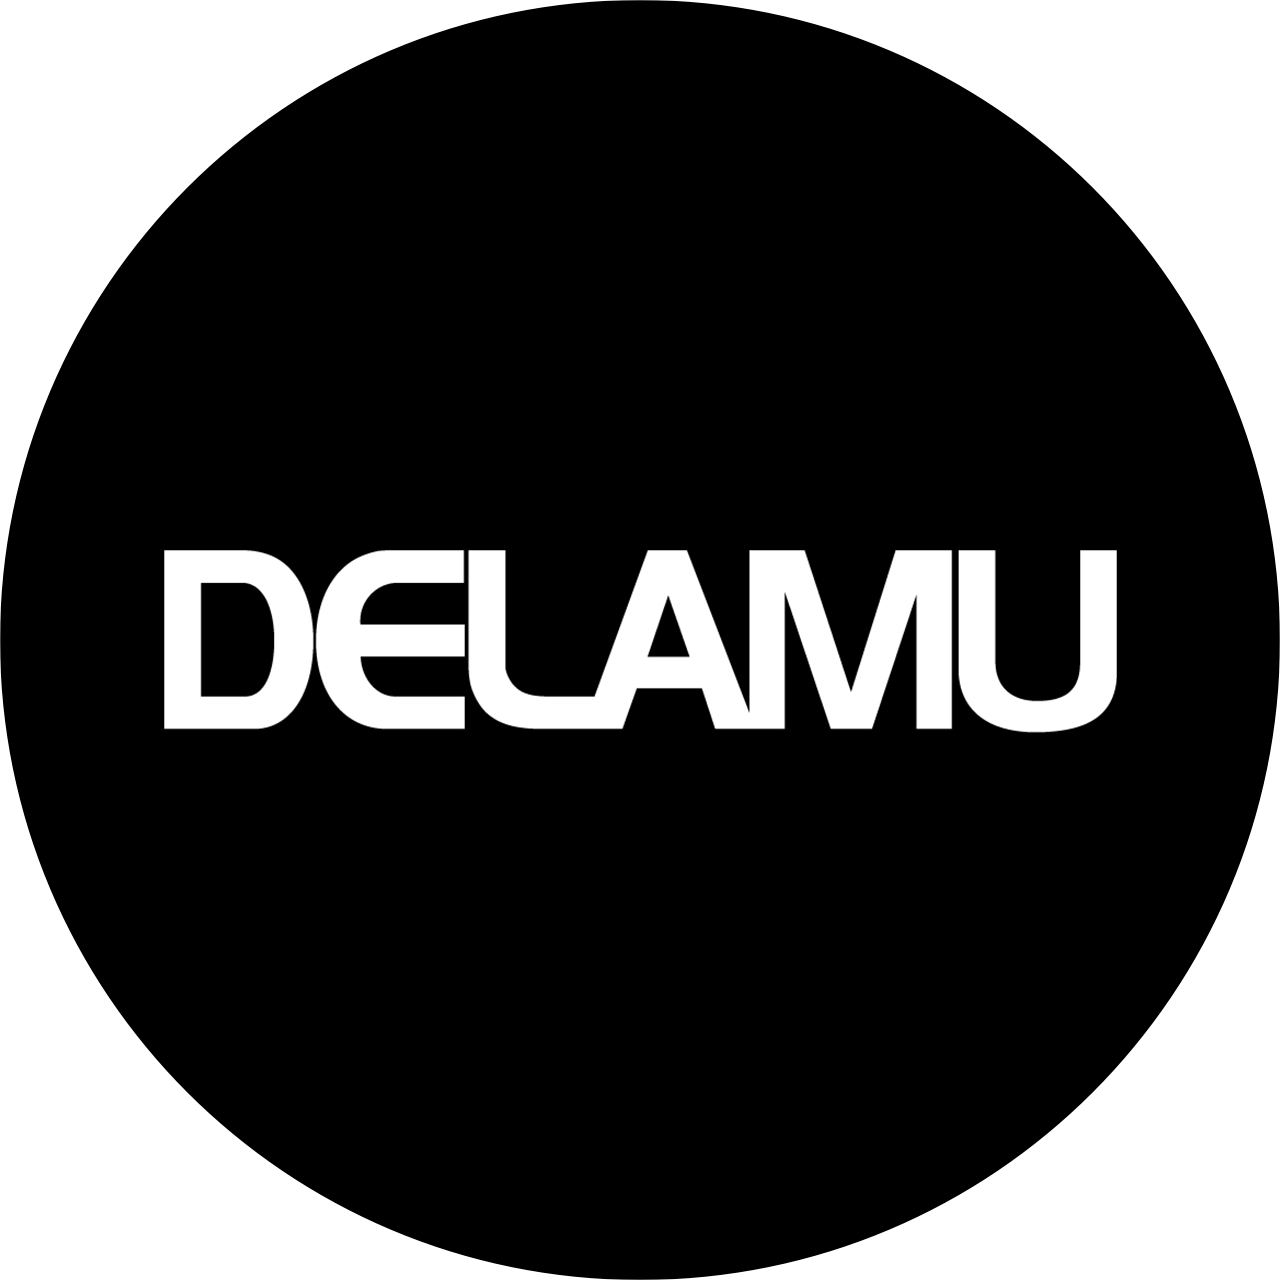 Delamu Cord Cover Raceway Kit, 157 Cable Management Channel, Paintable  Cord Concealer System Covers Cable, Cord Wires, Hiding Wall Mount TV Powers